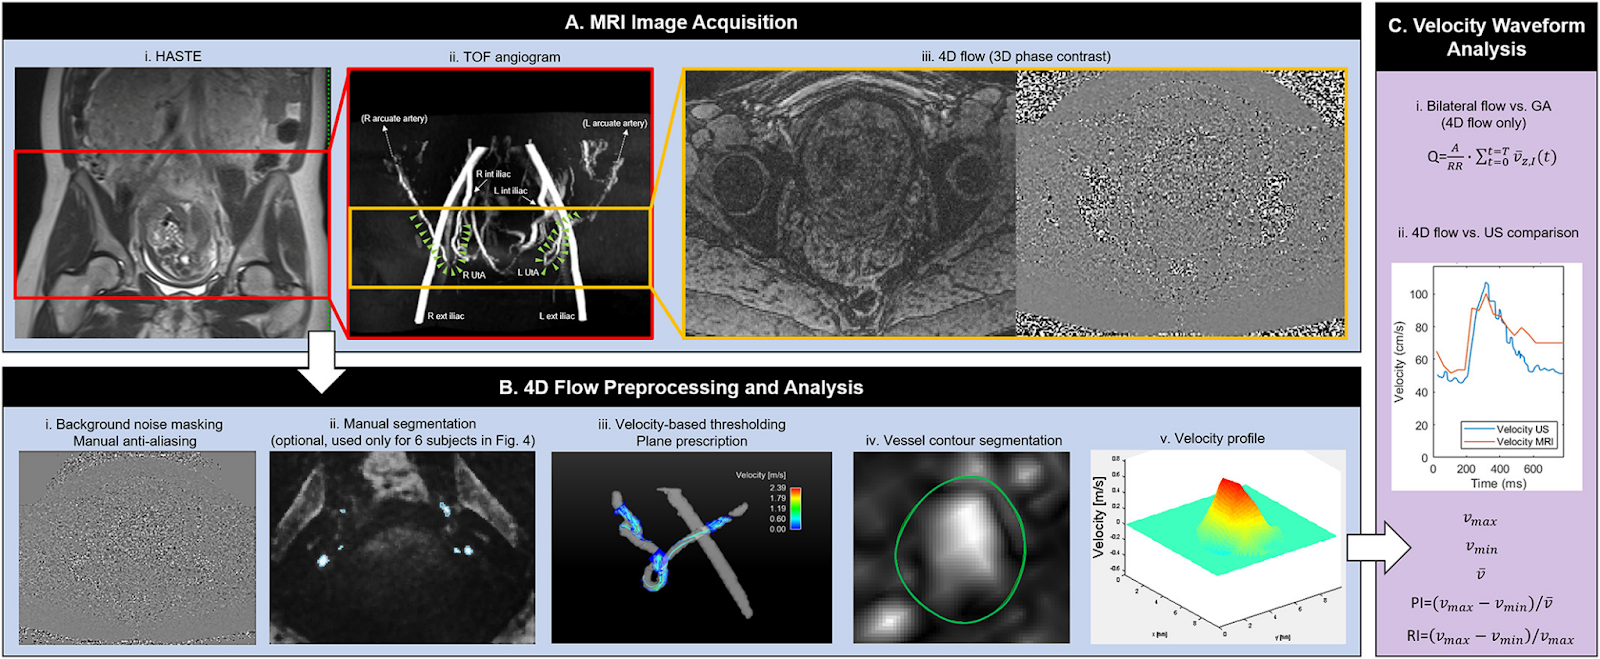 MRI acquisition, 4D flow processing, and velocity analysis in pregnant patients. Hwuang et al., J Magn Reson Imaging, 2019.